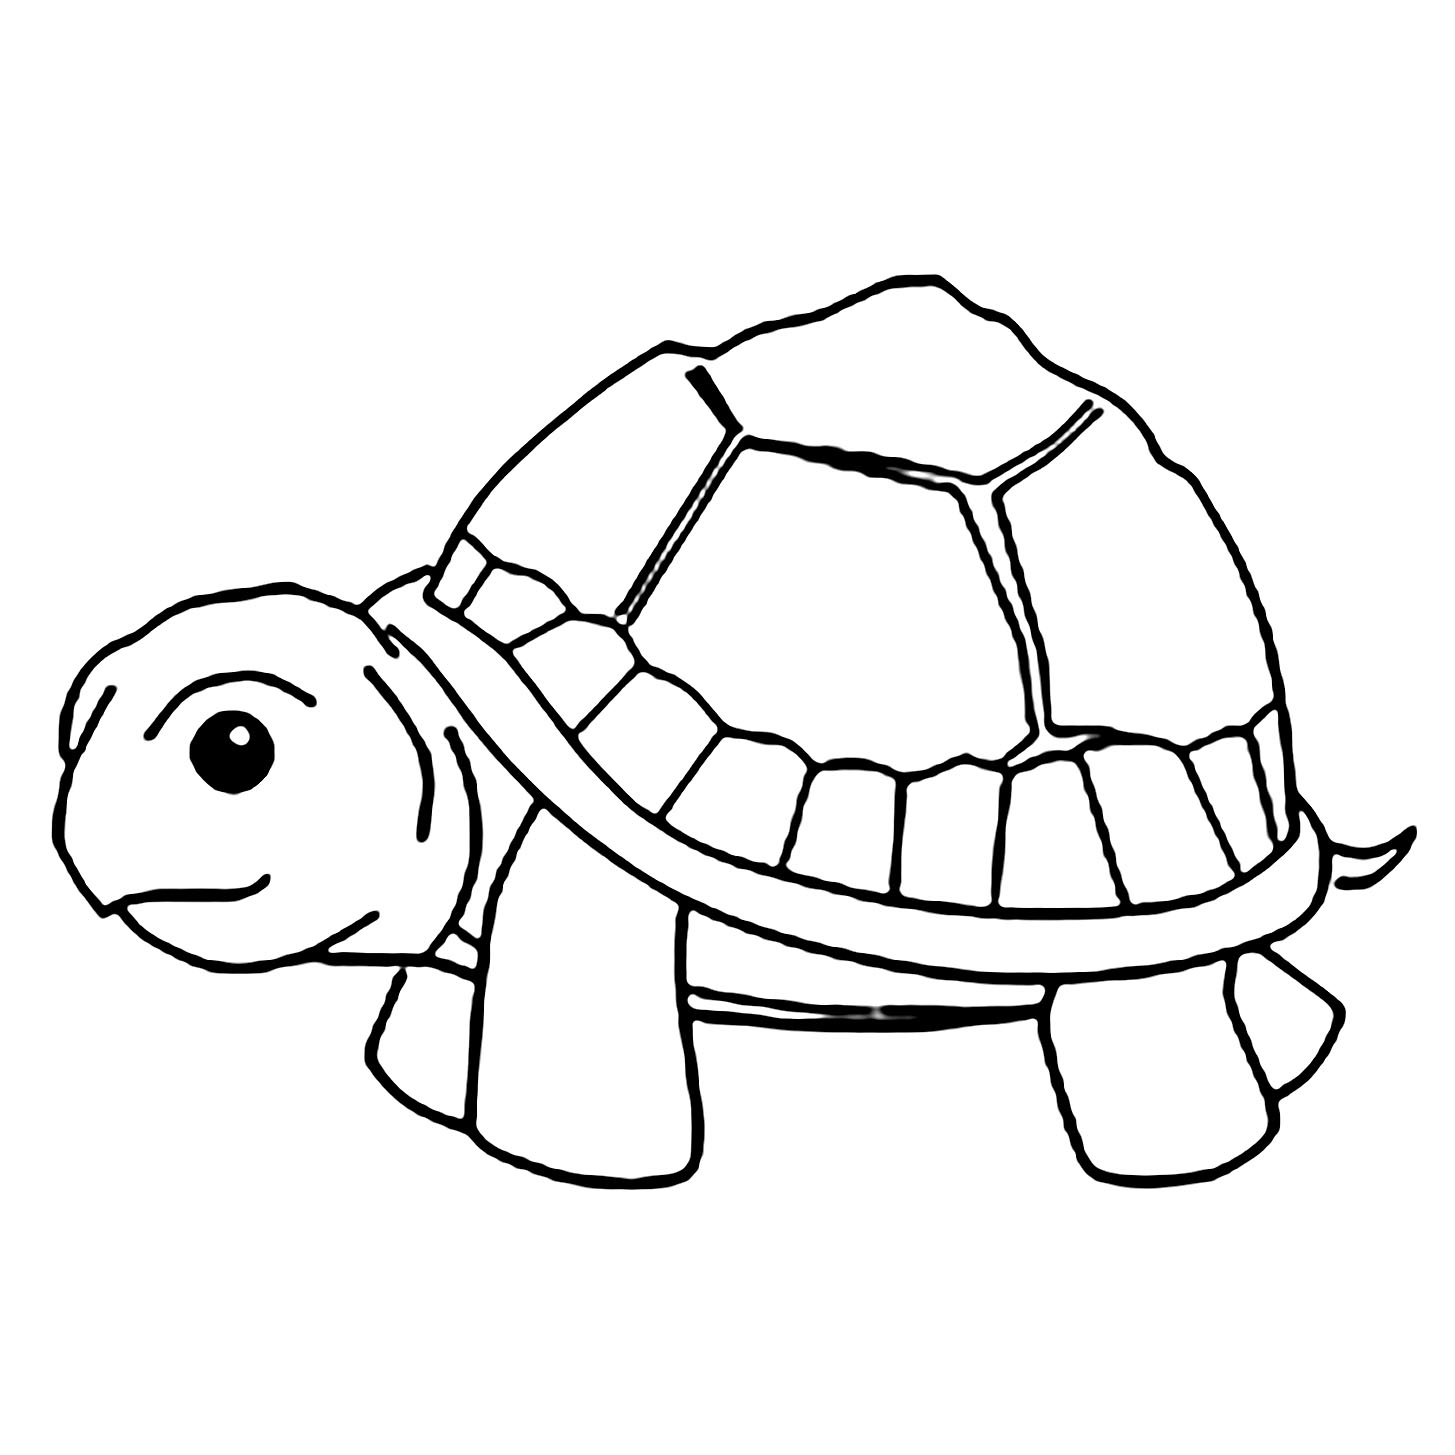 Nice simple turtle coloring for kids